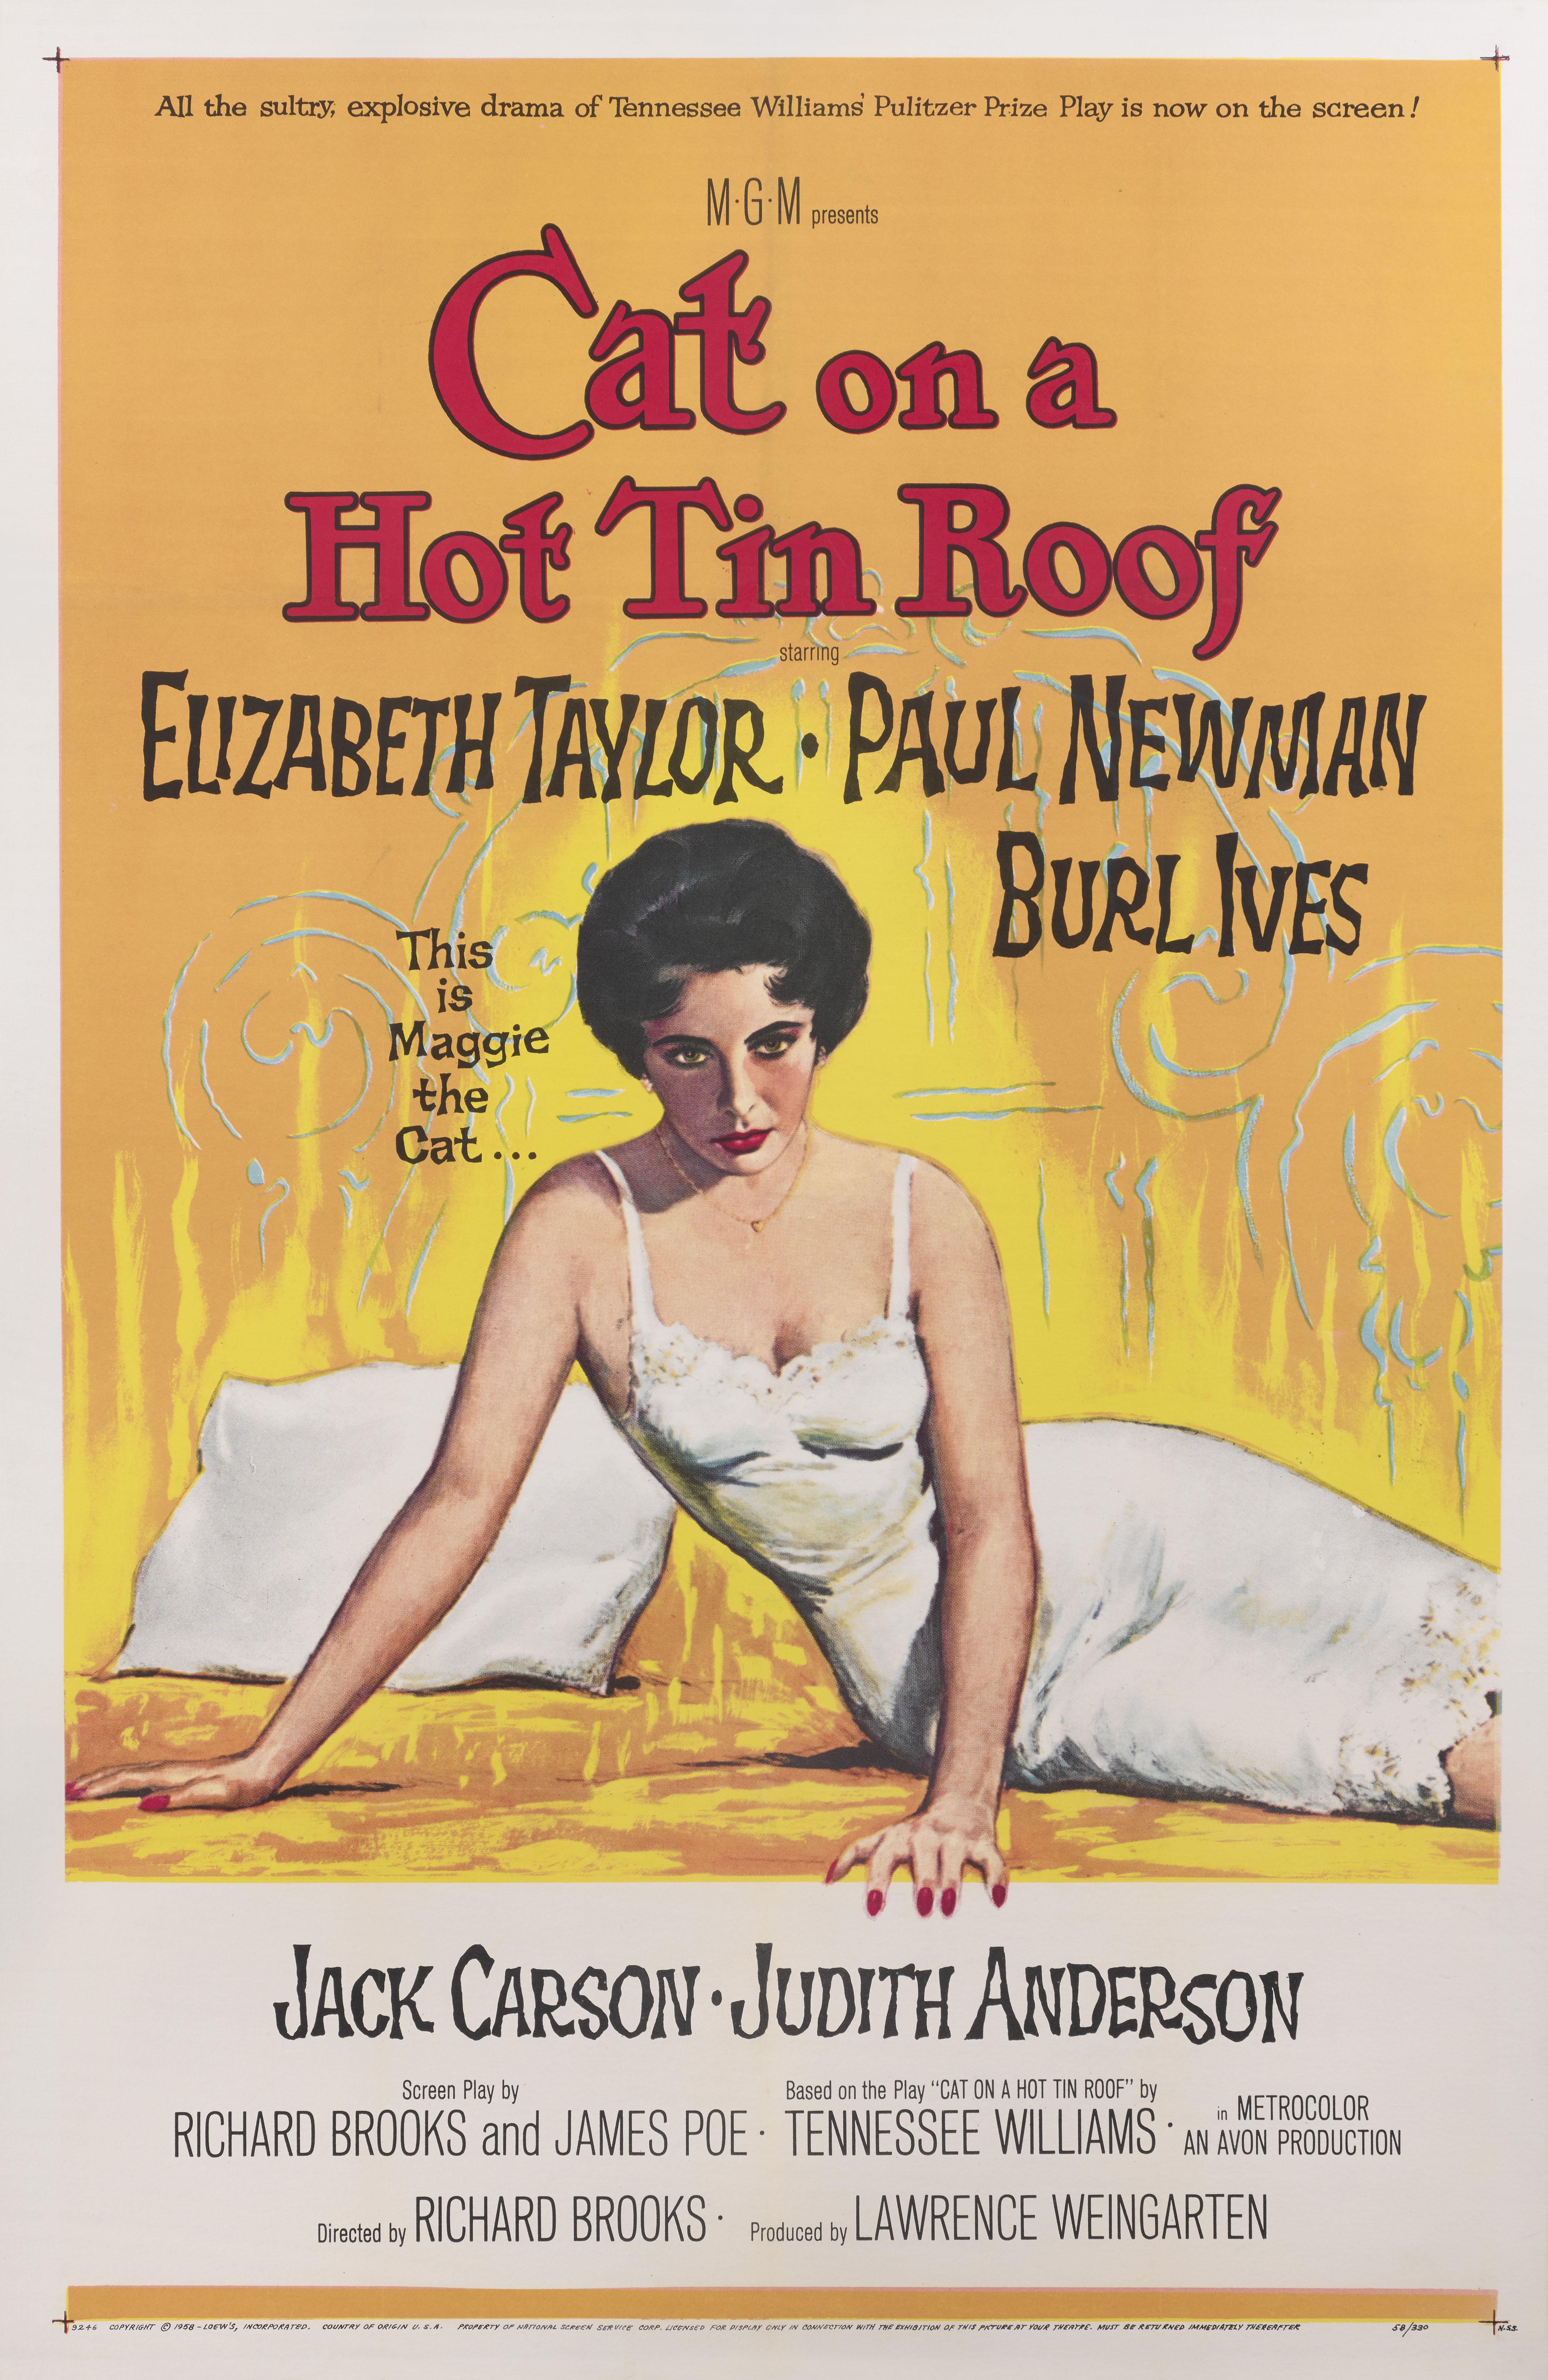 Original American film poster for the 1958 drama staring Elizabeth Taylor and Paul Newman.
This film was directed by Richard Brooks.
This poster is conservation linen backed and it would be shipped rolled in a very strong tube and sent by Federal